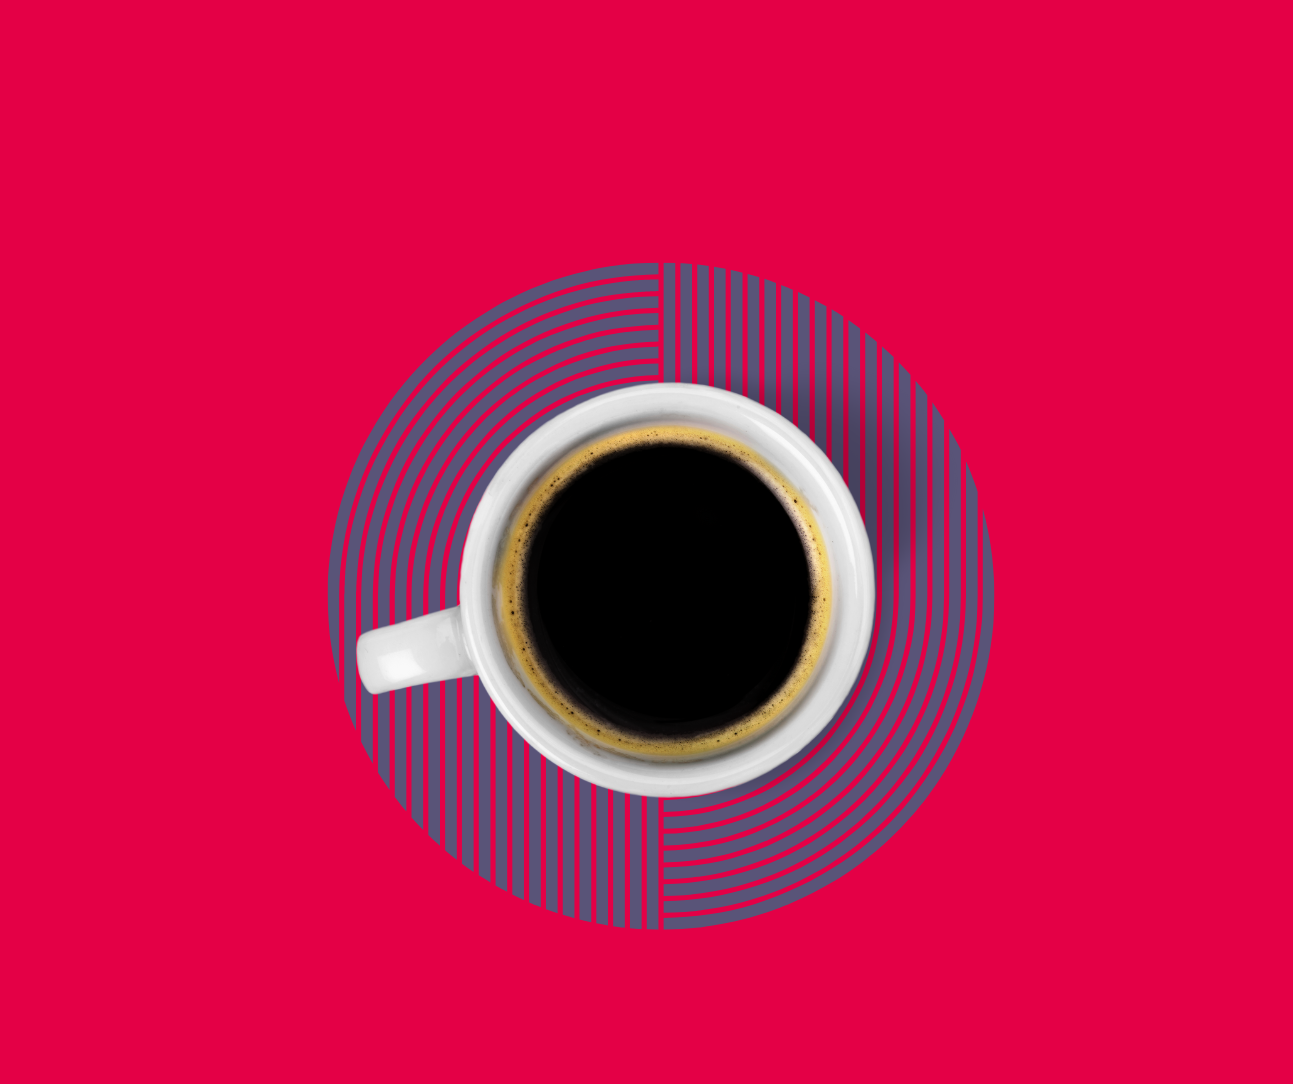 Birds eye view of coffee against blue patterned coaster with a red background